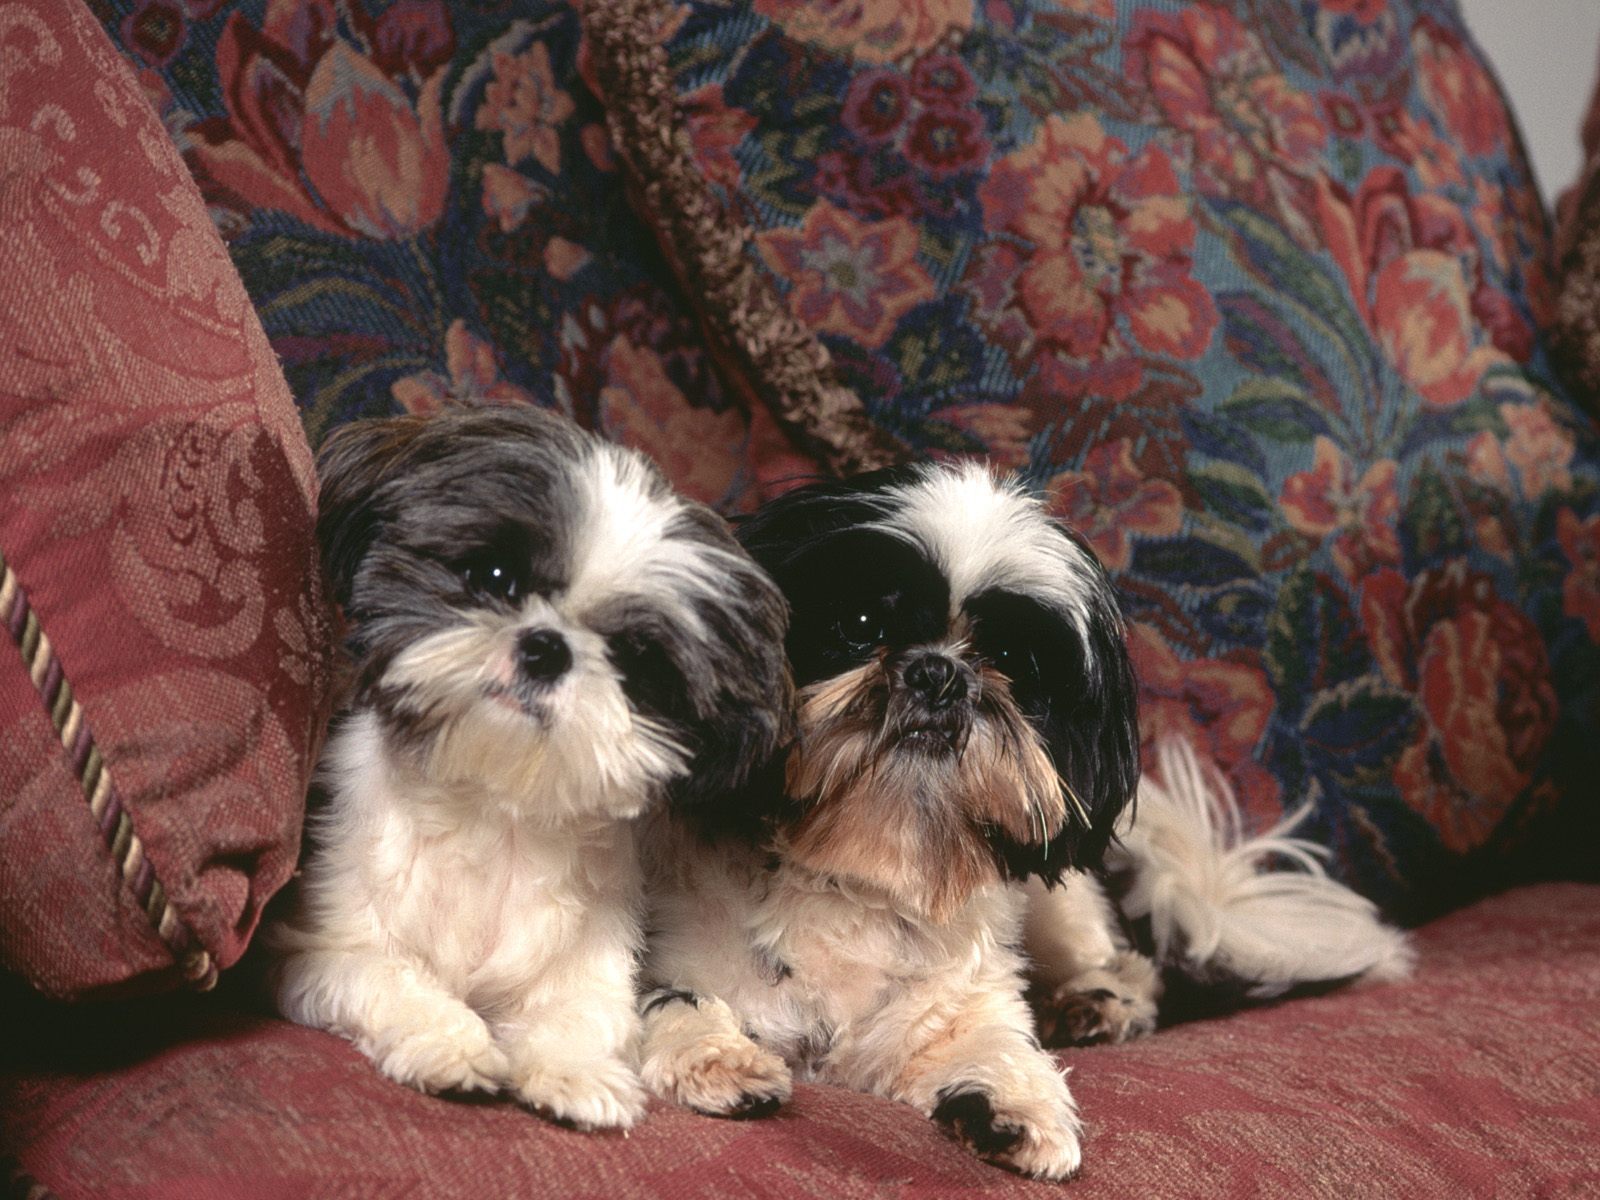 Two dogs shih tzu on the couch wallpapers and images - wallpapers